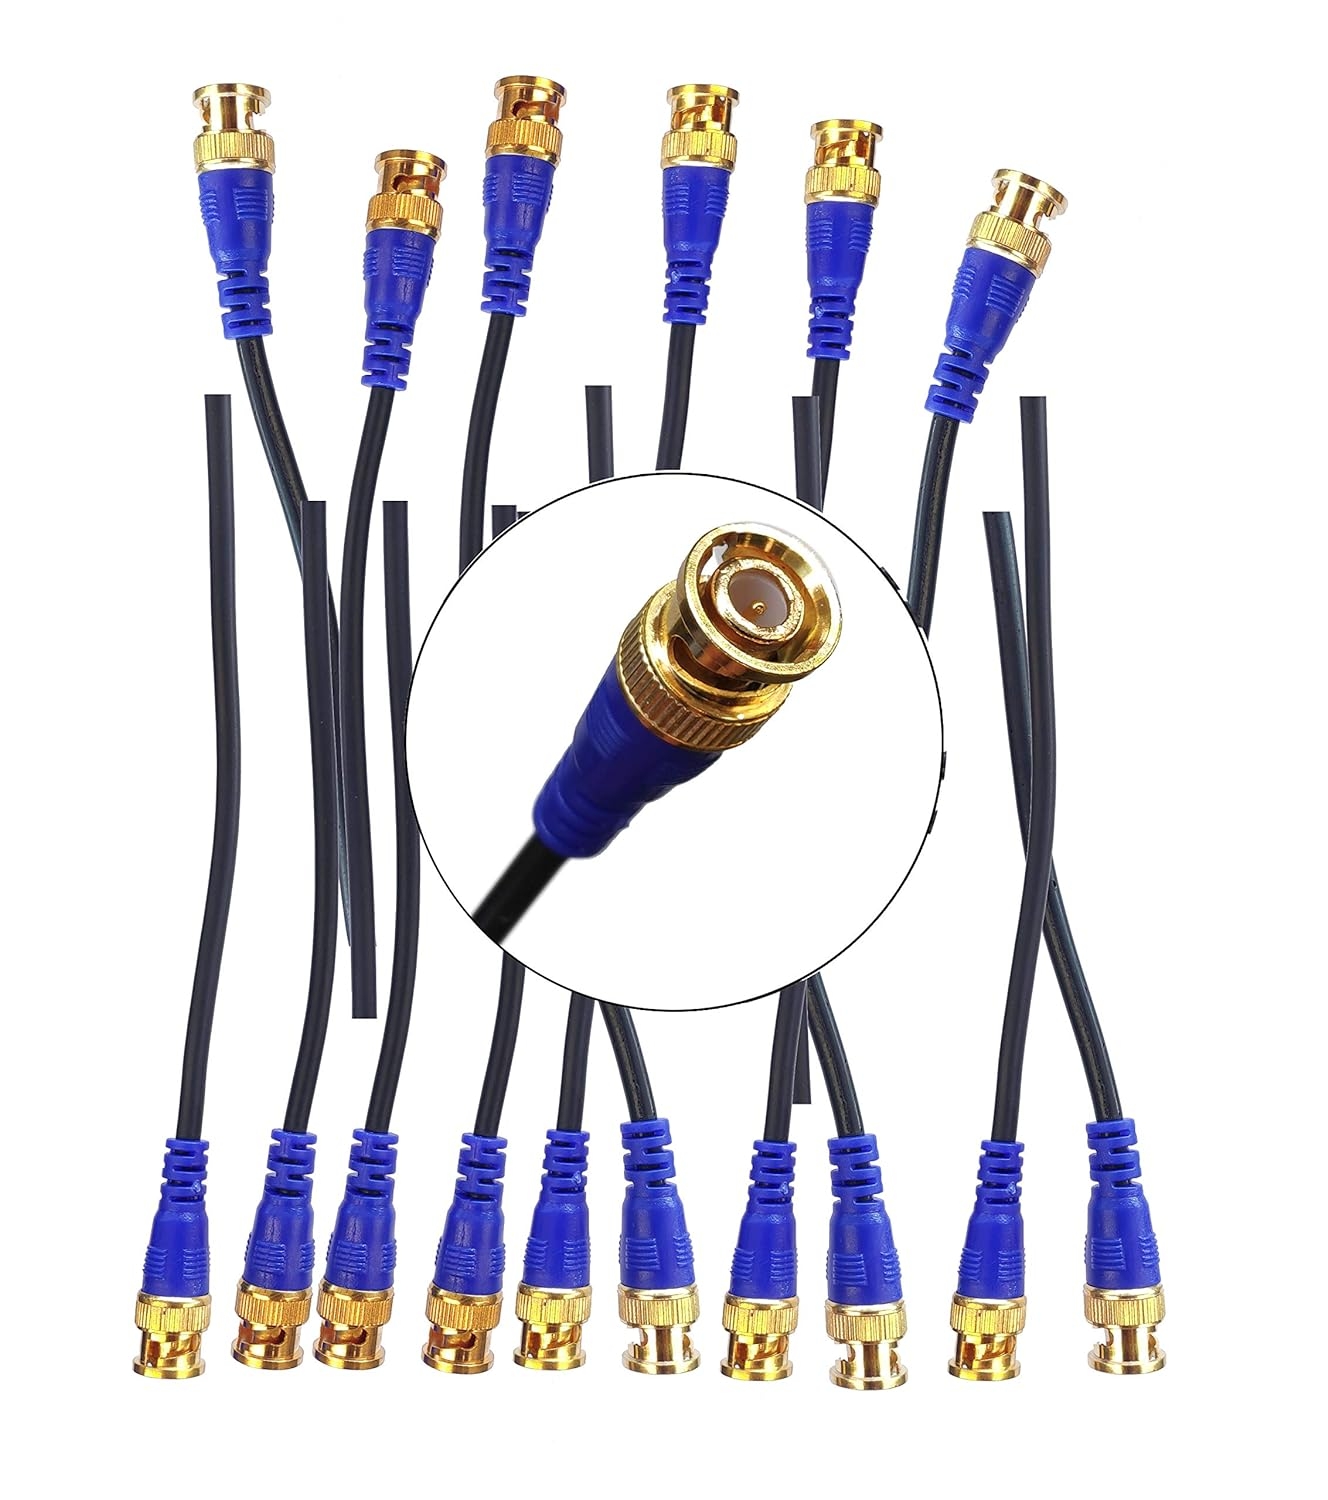 golden wire Bnc Connectors for CCTV Camera (16 BNC Pin, Gold wire)